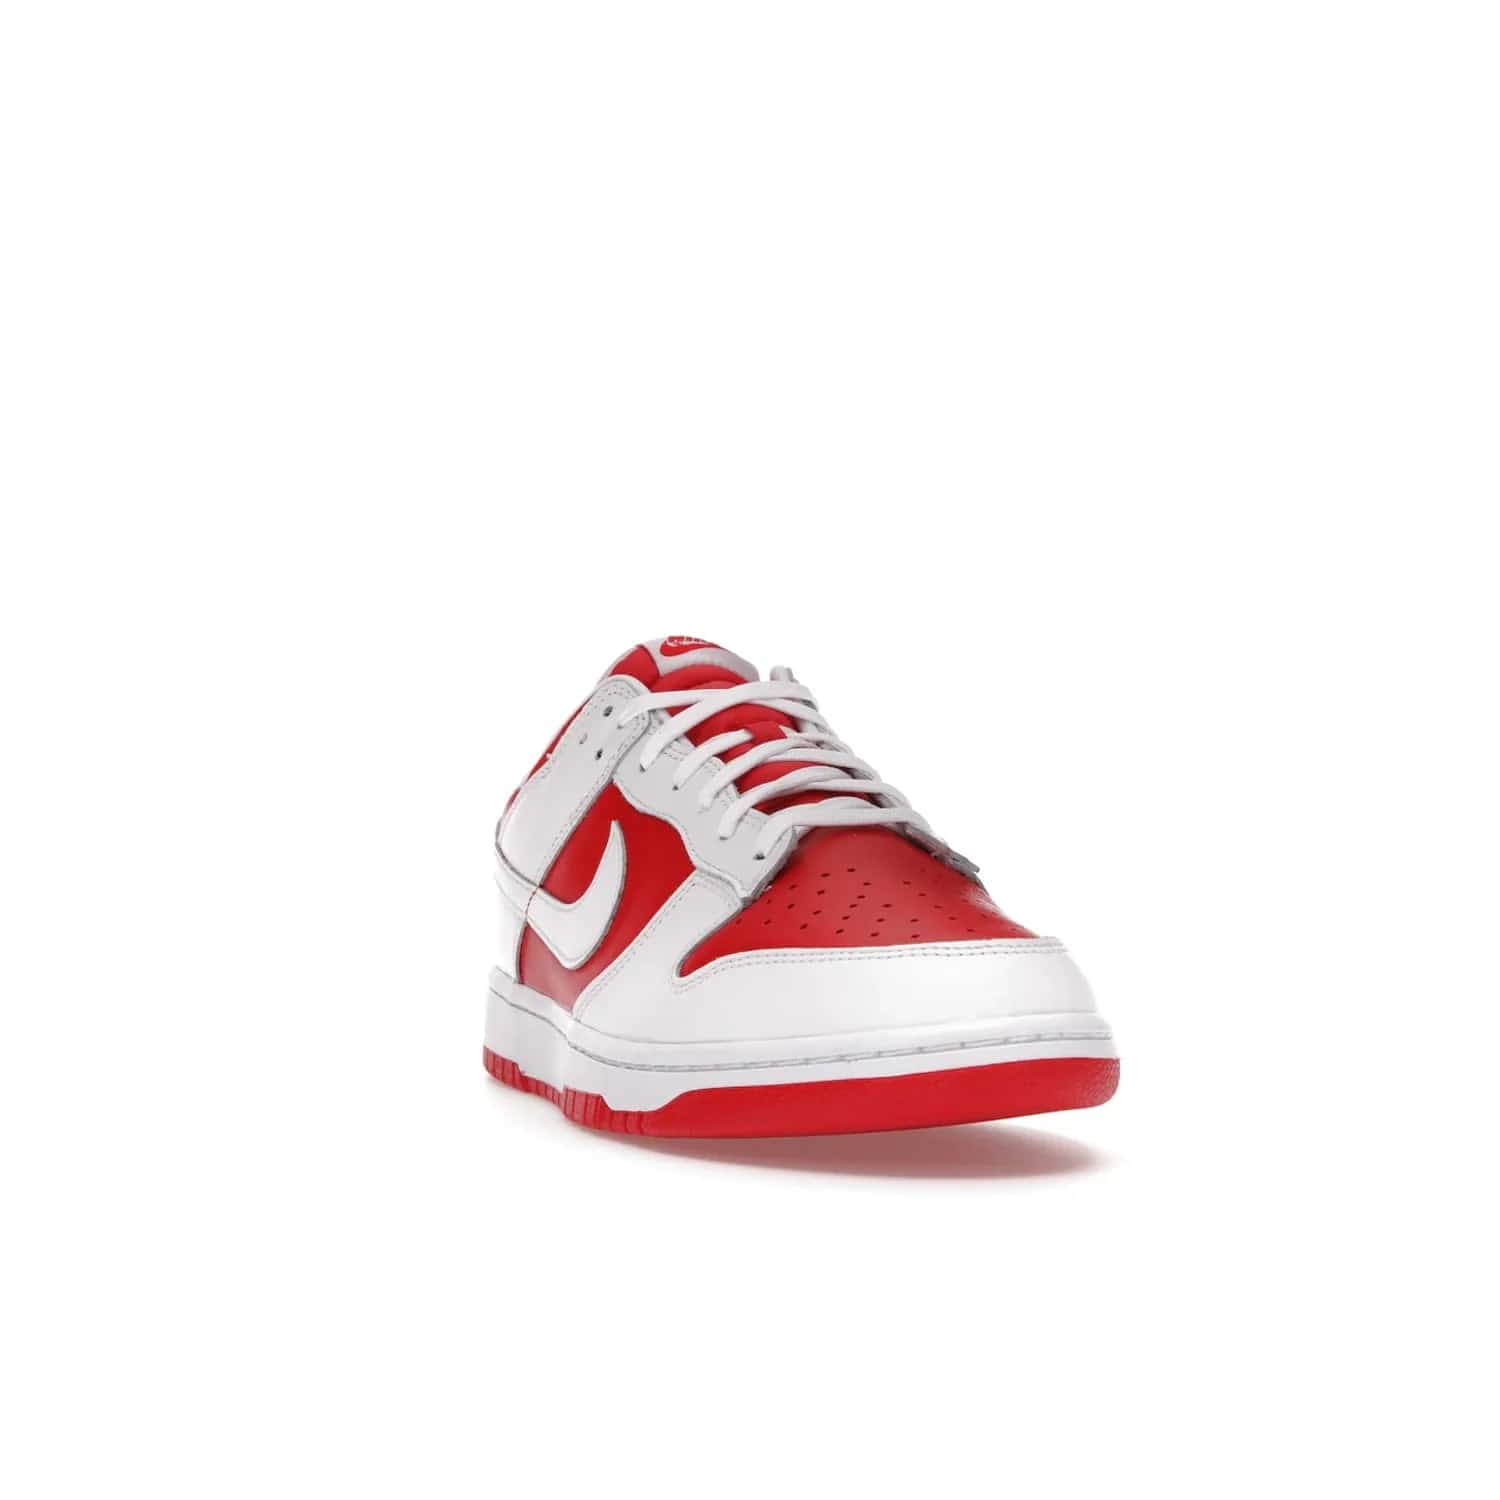 Nike Dunk Low Championship Red (2021) - Image 8 - Only at www.BallersClubKickz.com - A bold and stylish Nike Dunk Low Championship Red from 2021 with a classic retro design. University Red upper, white leather overlays and Swooshes, and a woven tongue label. Make a statement with these sleek kicks!